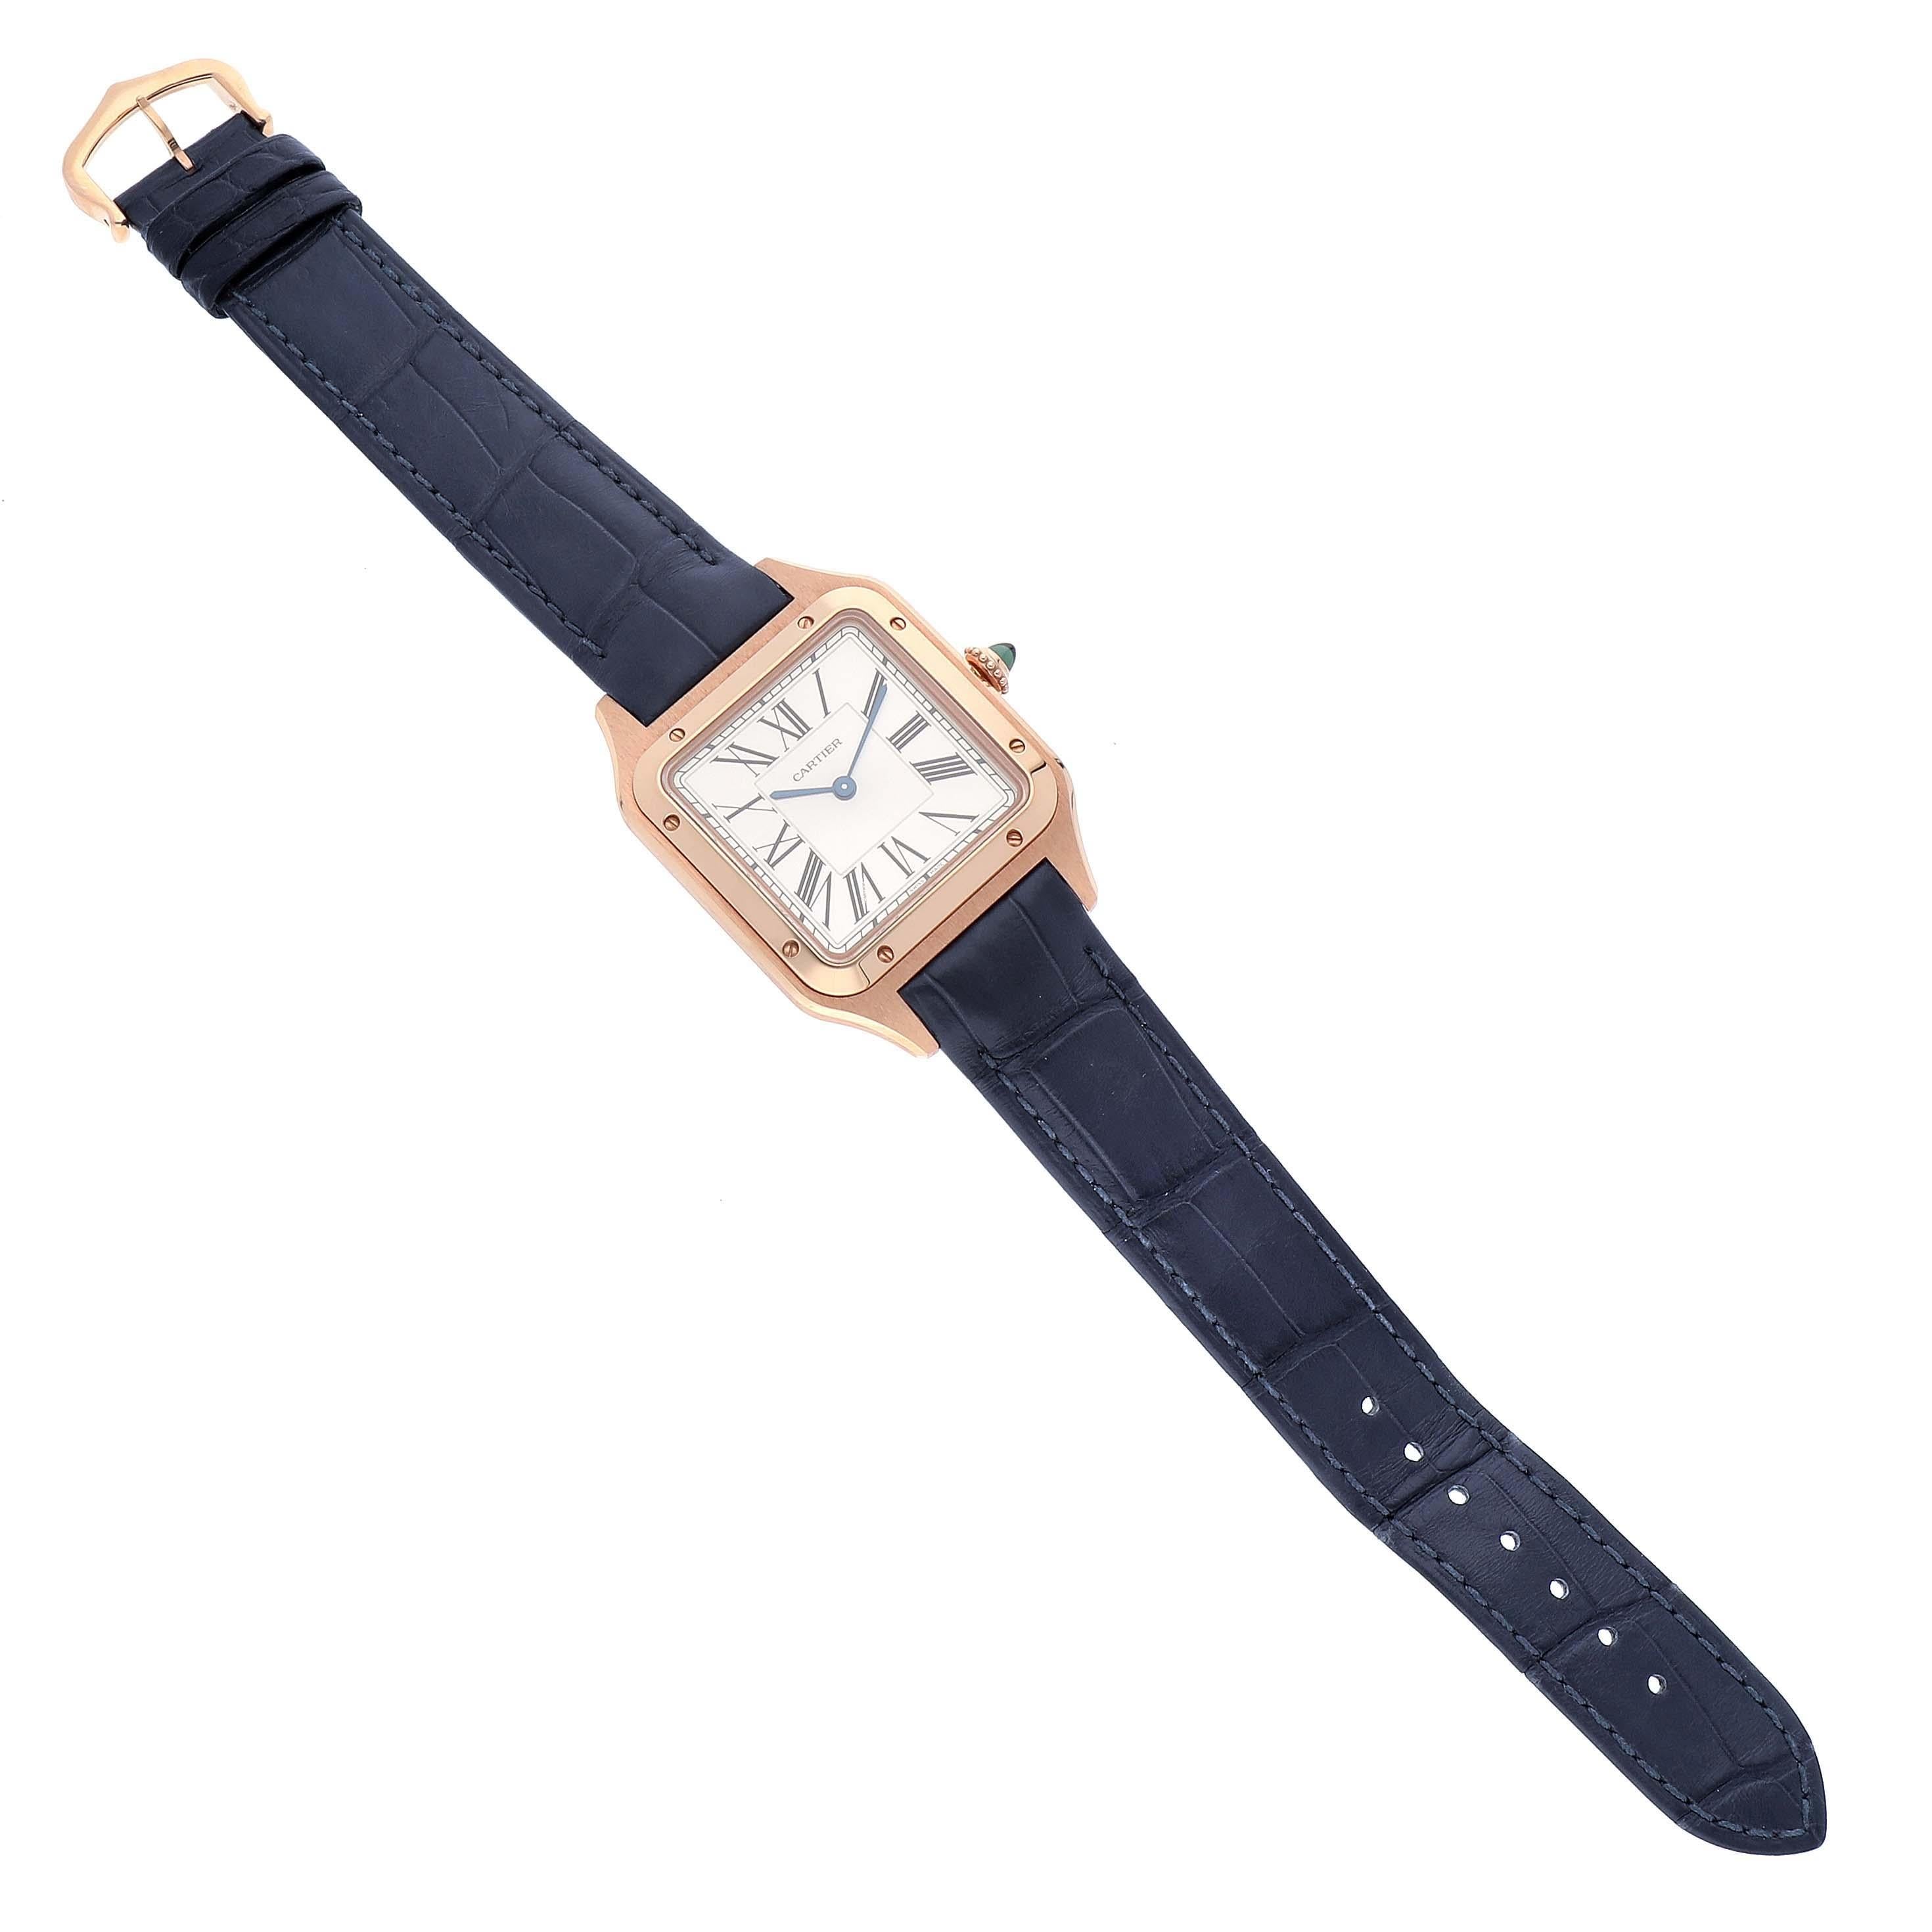 Cartier Santos Dumont Large Rose Gold Silver Dial Mens Watch WGSA0021 Box Card For Sale 1